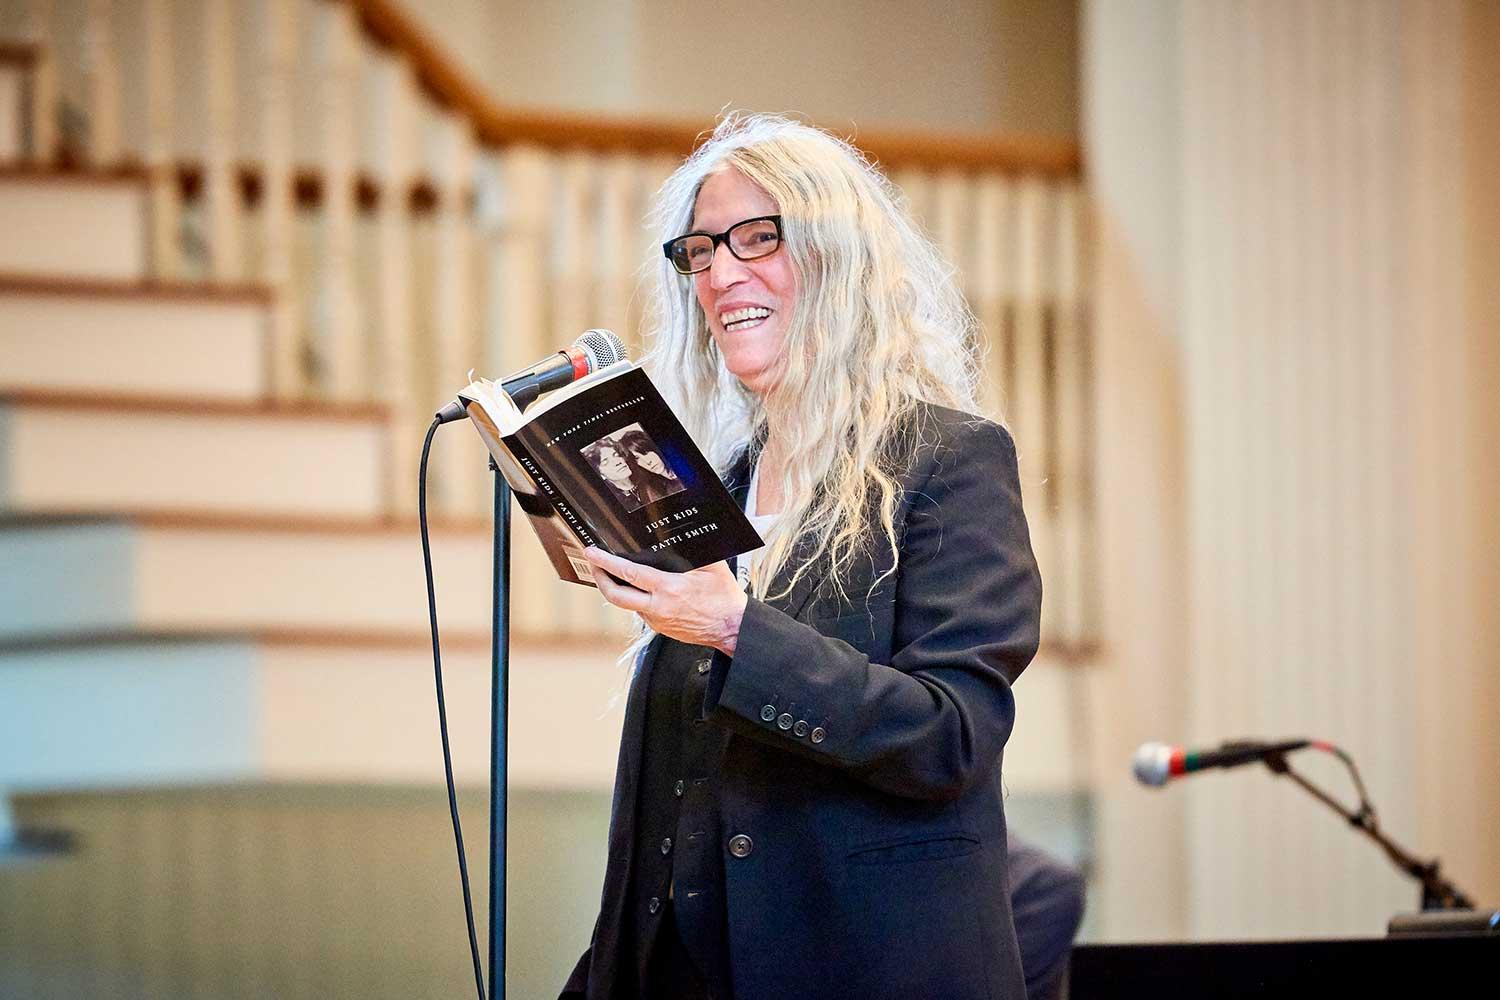 Patti Smith performs in the Colgate Memorial Chapel during Living Writers 2018 and Bicentennial Kickoff Weekend